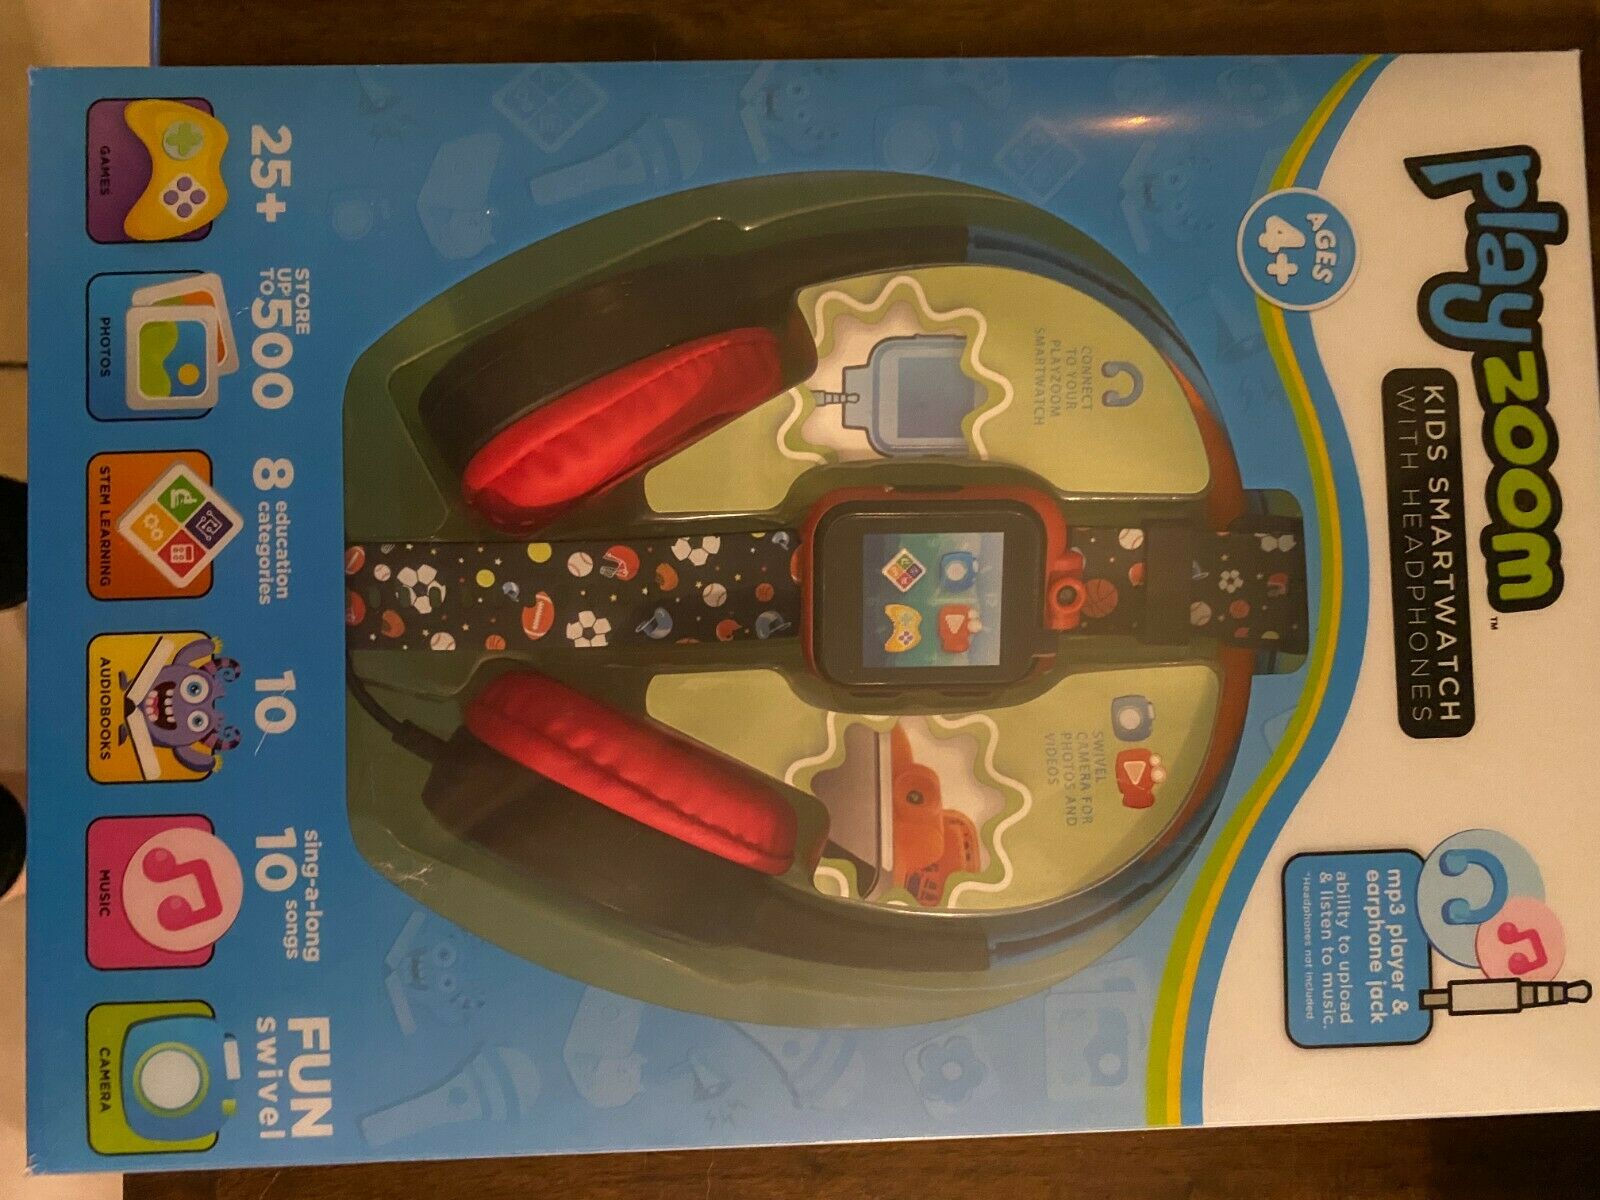 itouch playzoom kids smart watch